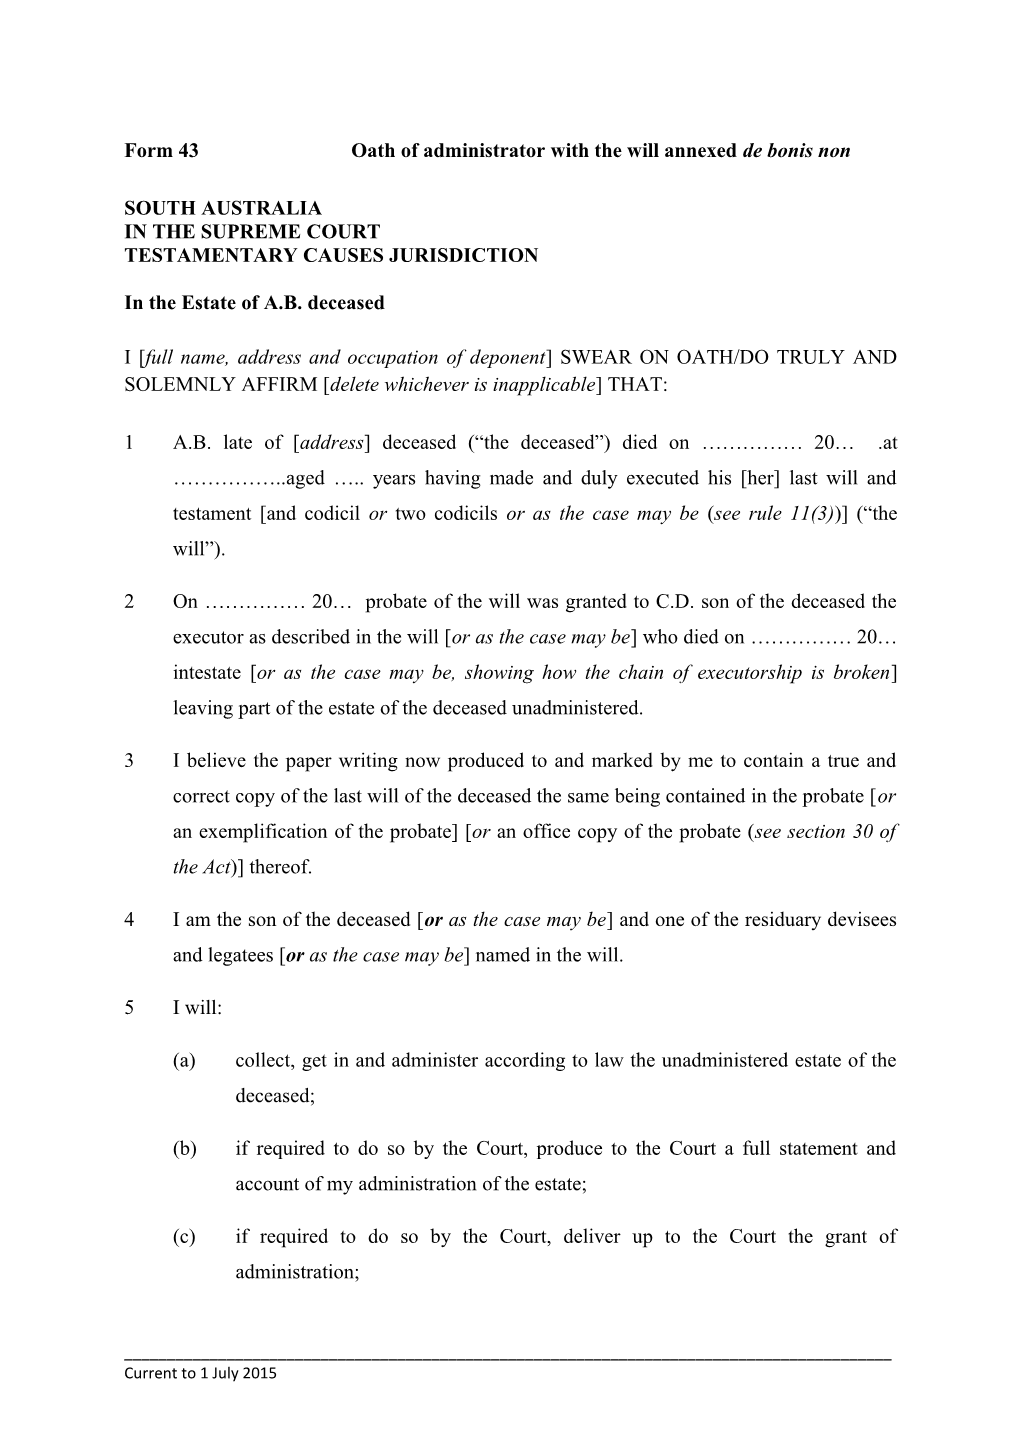 Form 43 - Oath of Administrator with the Will Annexed De Bonis Non